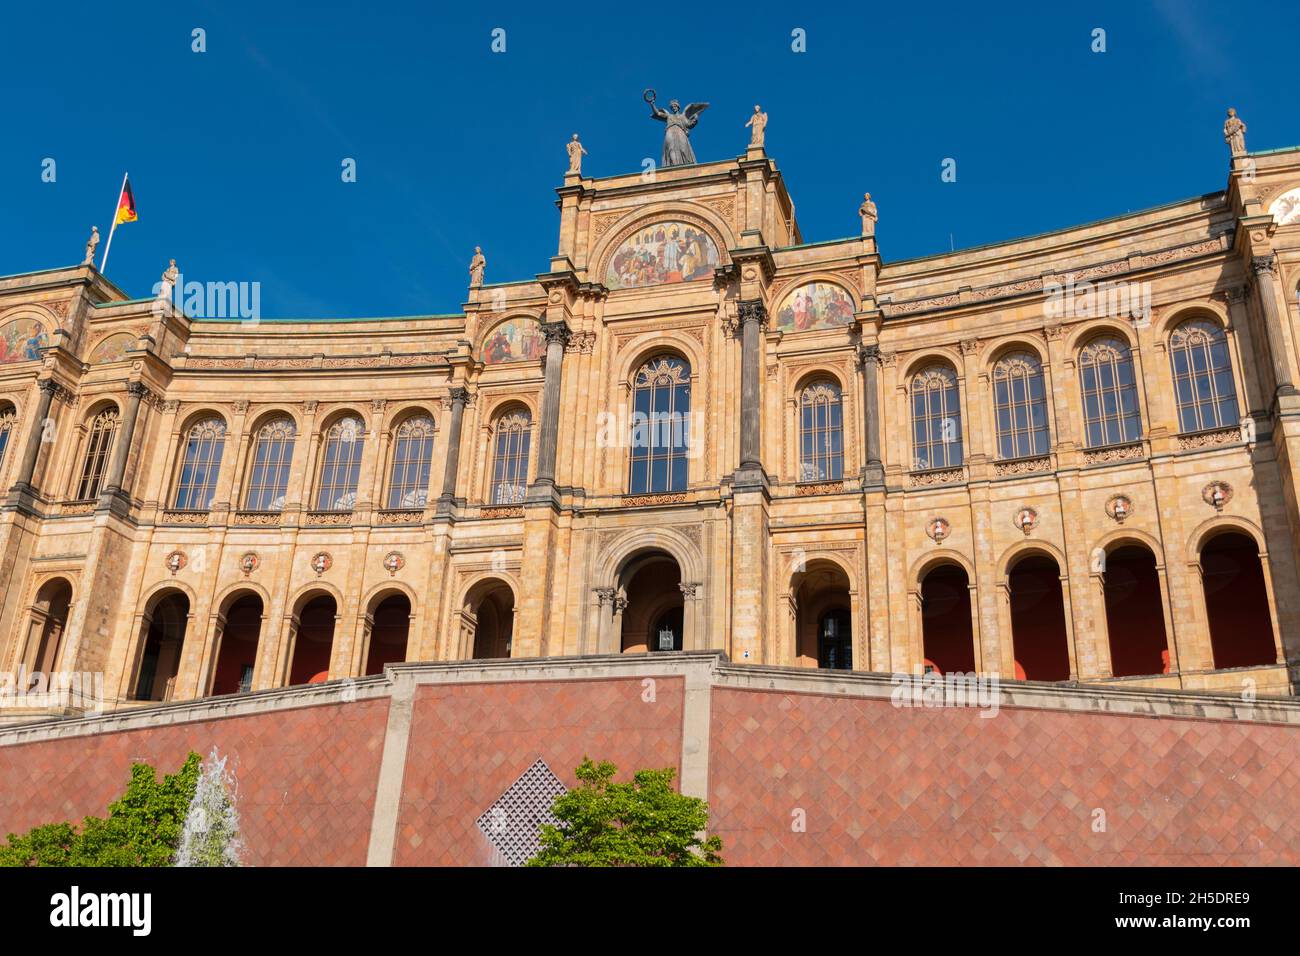 23 May 2019 Munich, Germany - Maximilianeum was built as the home of a gifted students' foundation but since 1949 has housed the Bavarian State Parlia Stock Photo